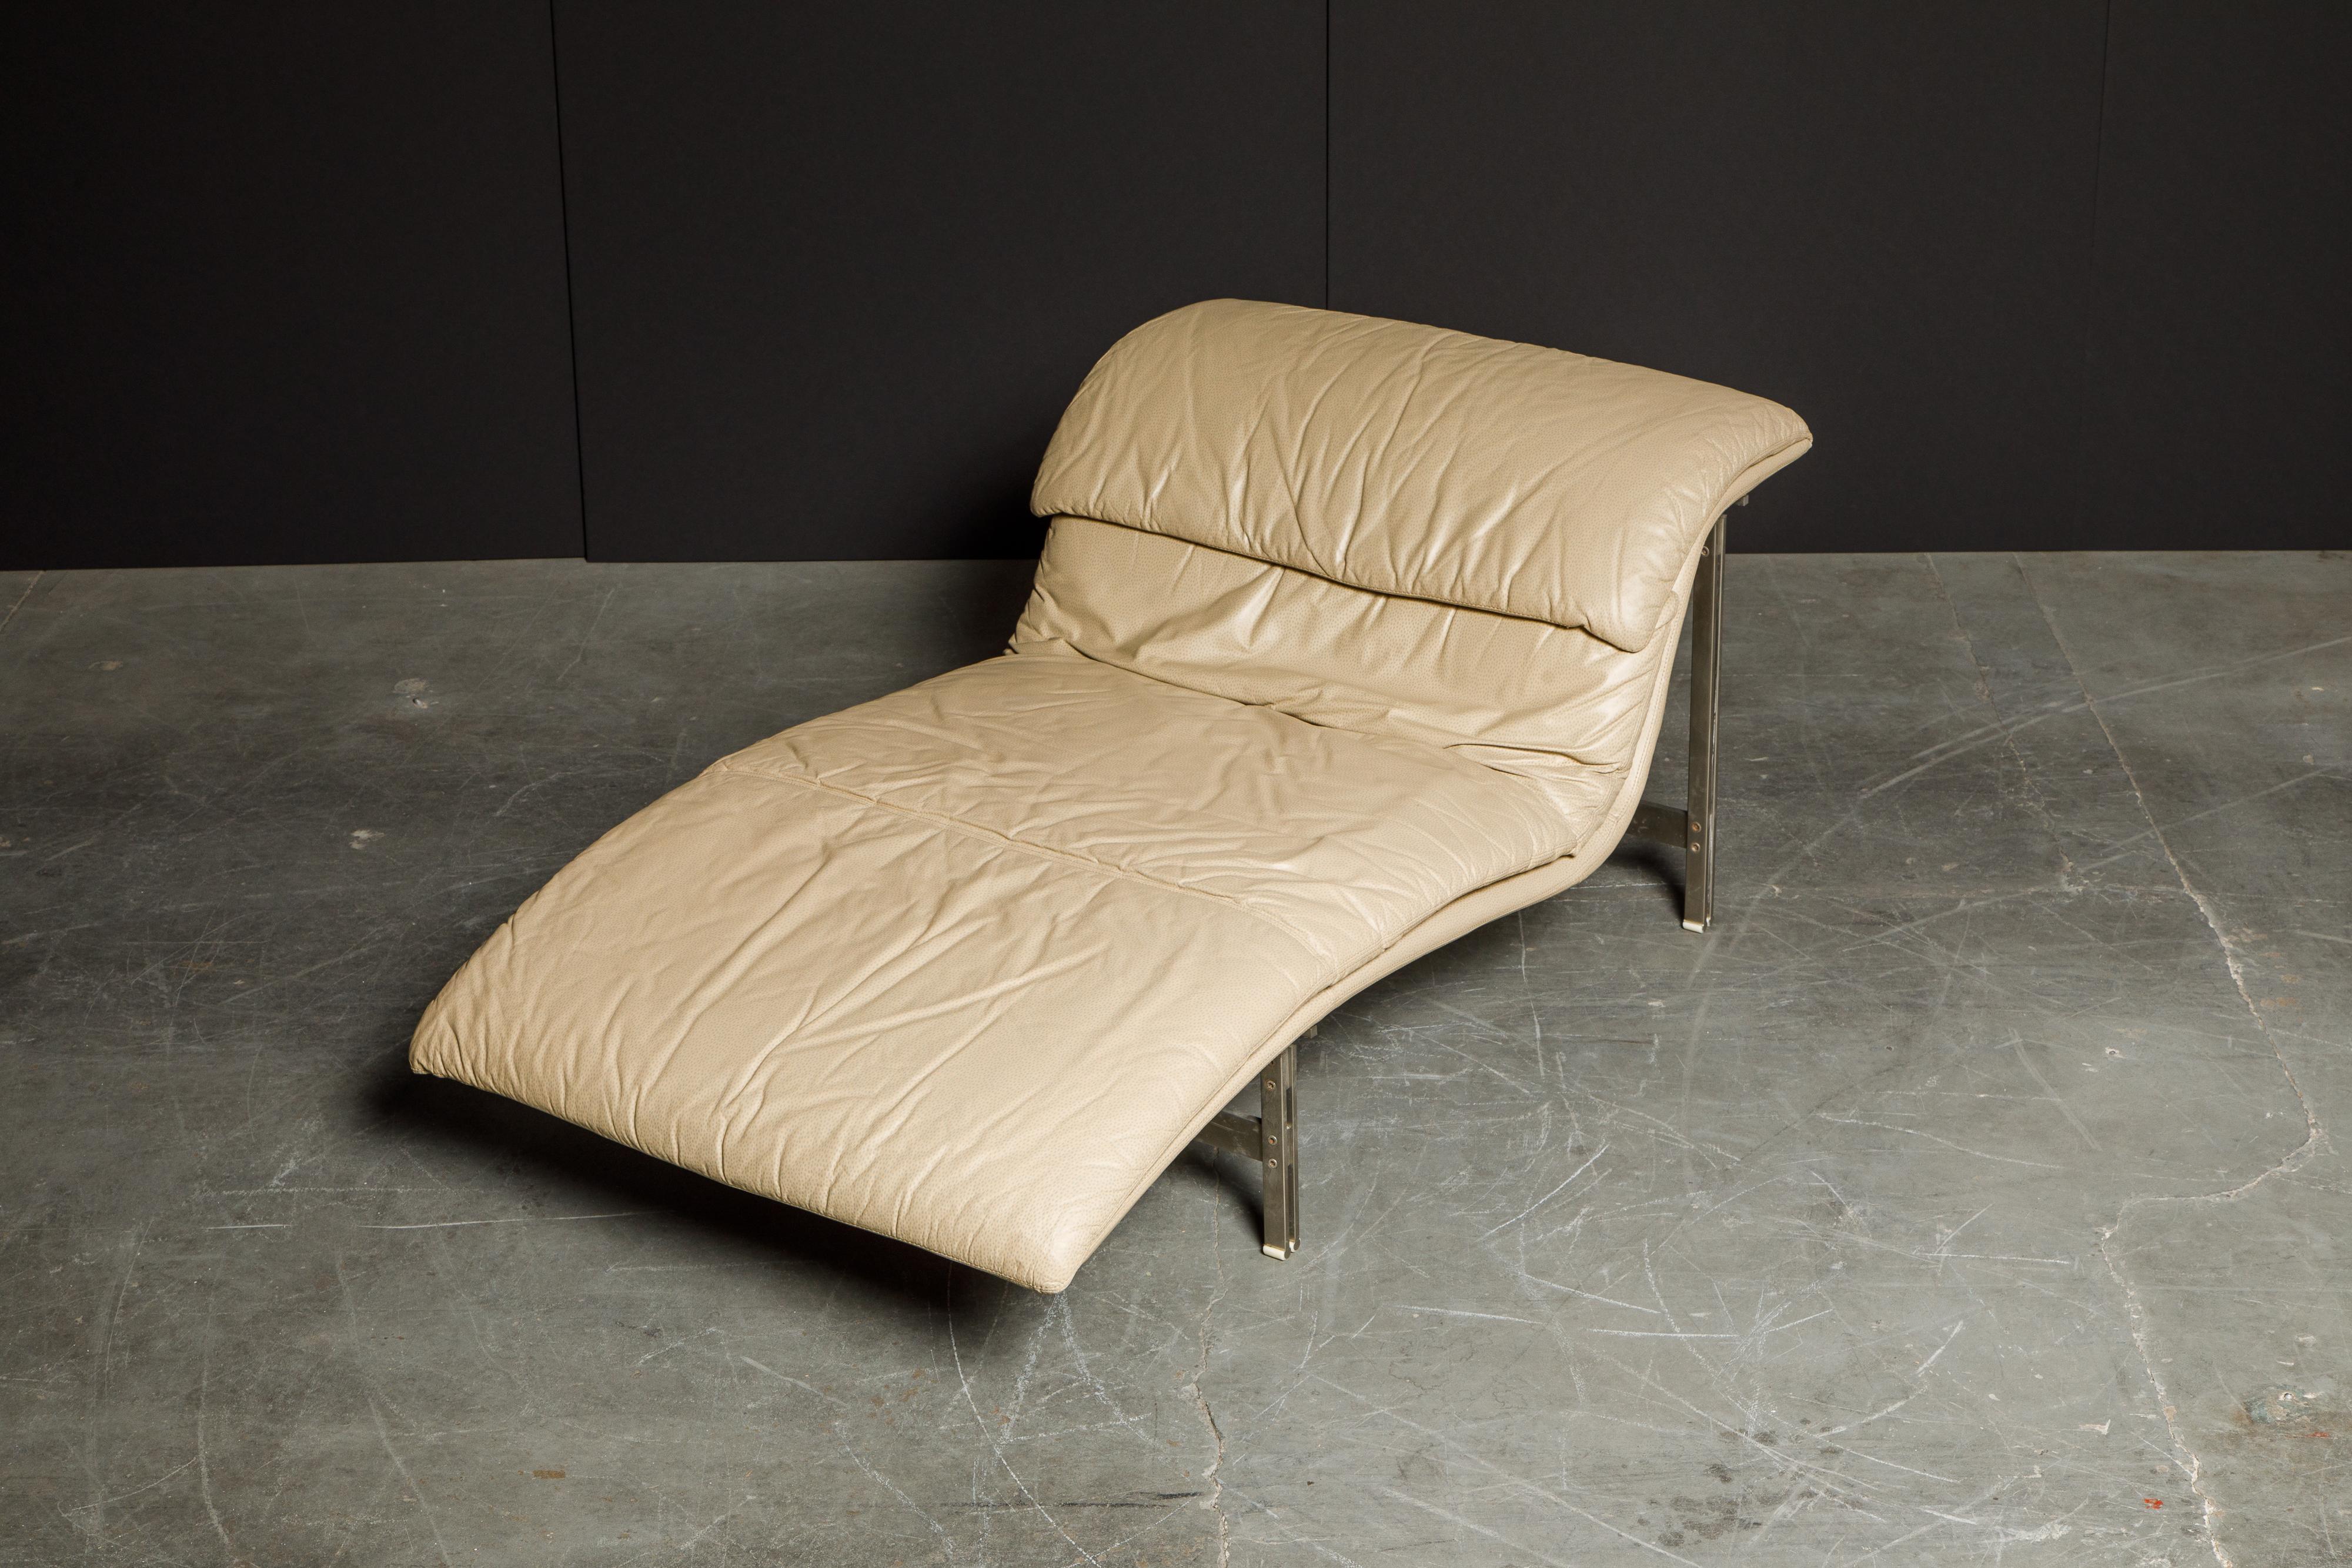 Steel Leather 'Wave' Chaise by Giovanni Offredi for Saporiti Italia, c. 1978, Signed